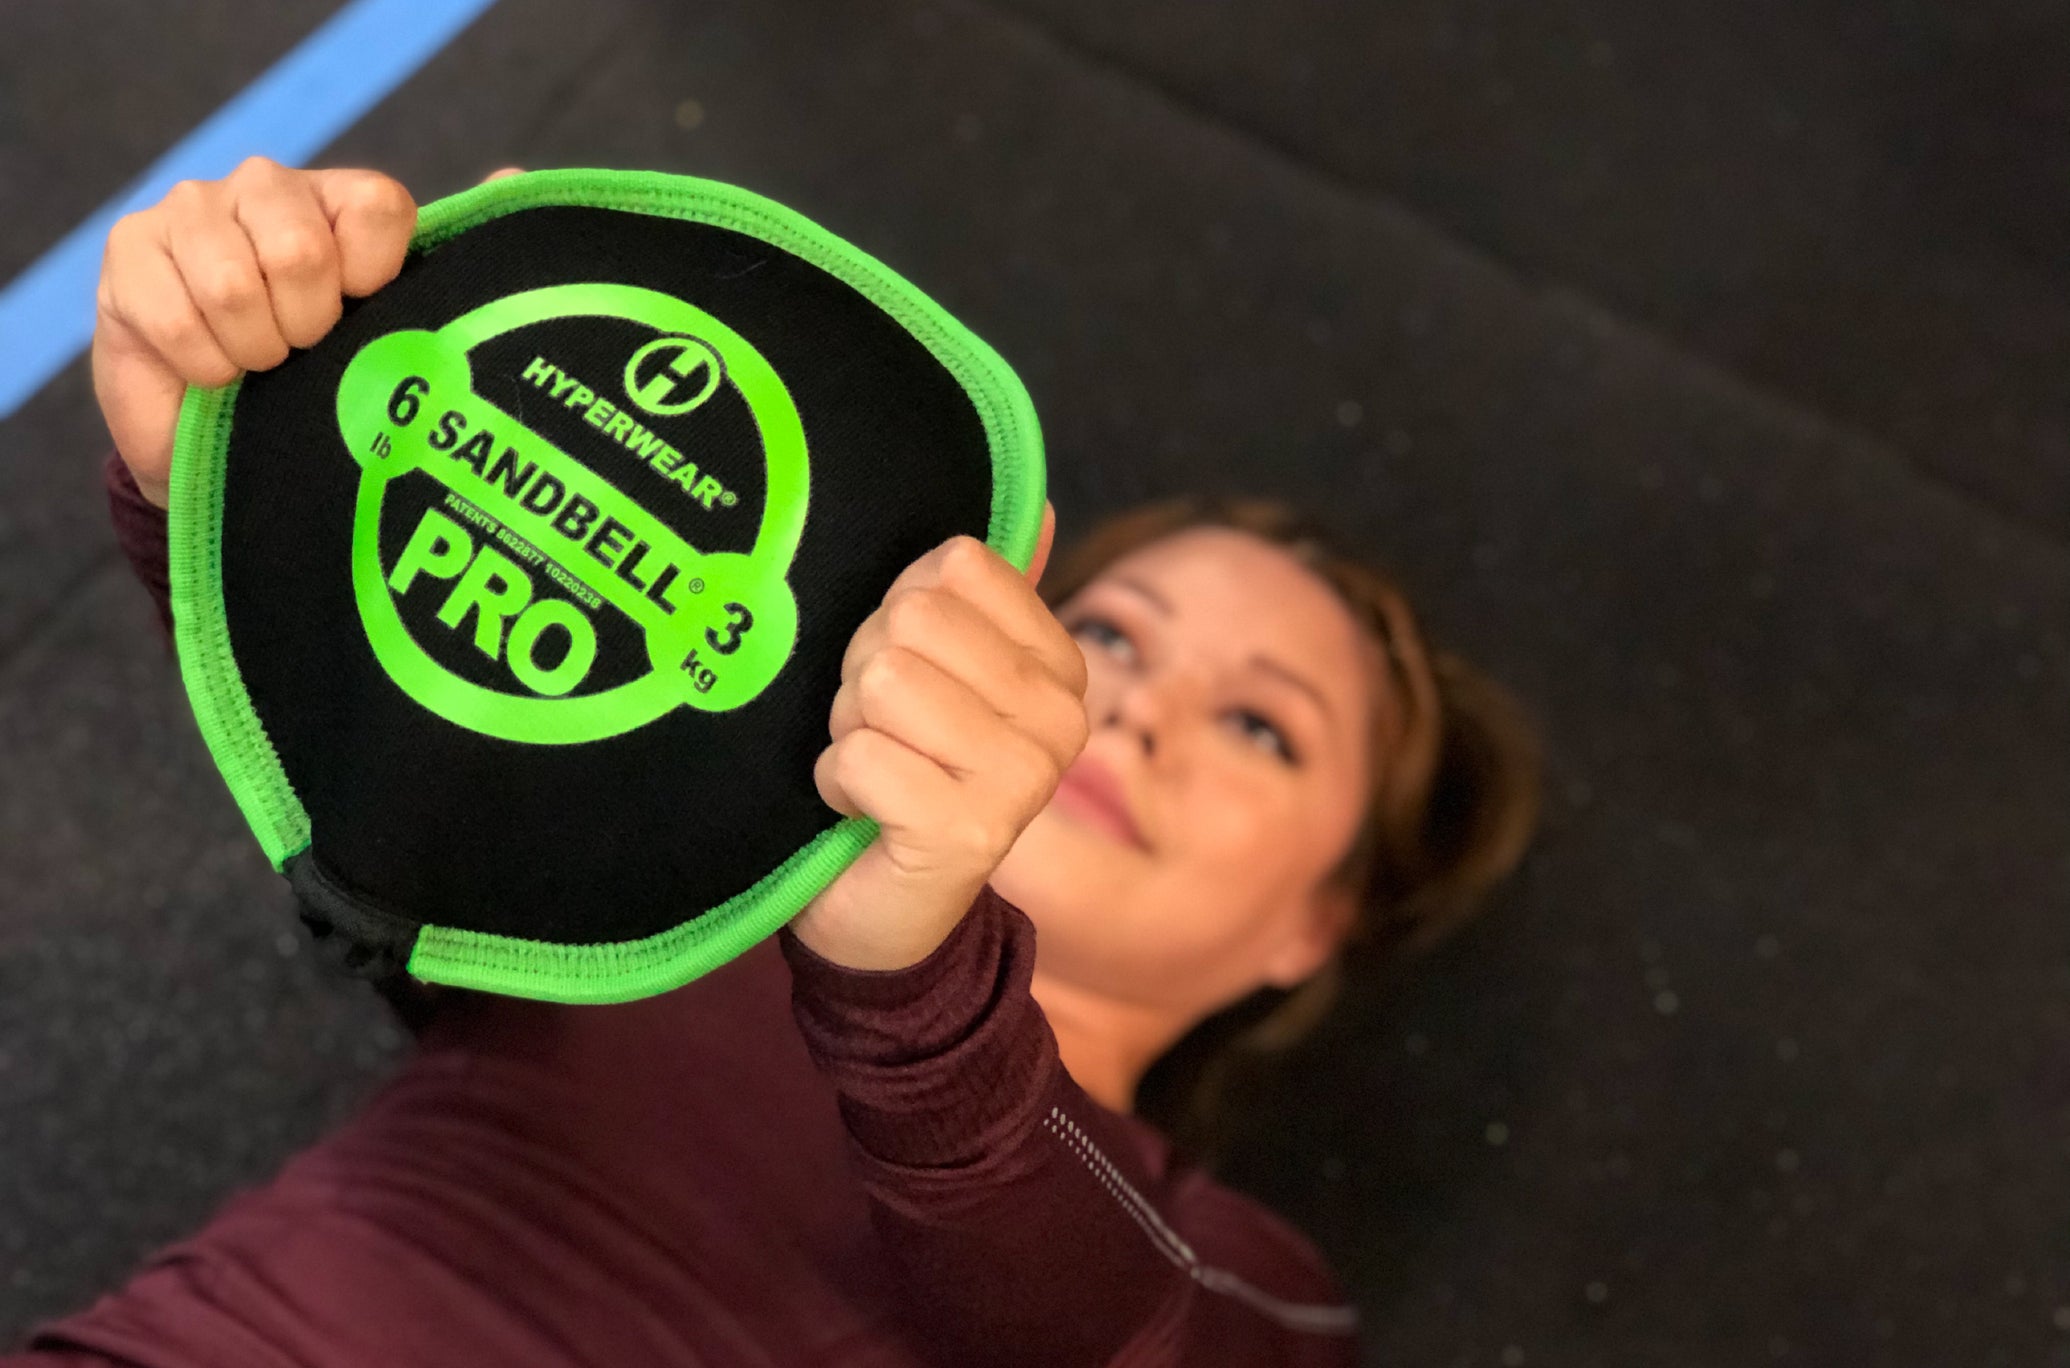 Woman Working Out With Green Hyperwear Sandbell Pro